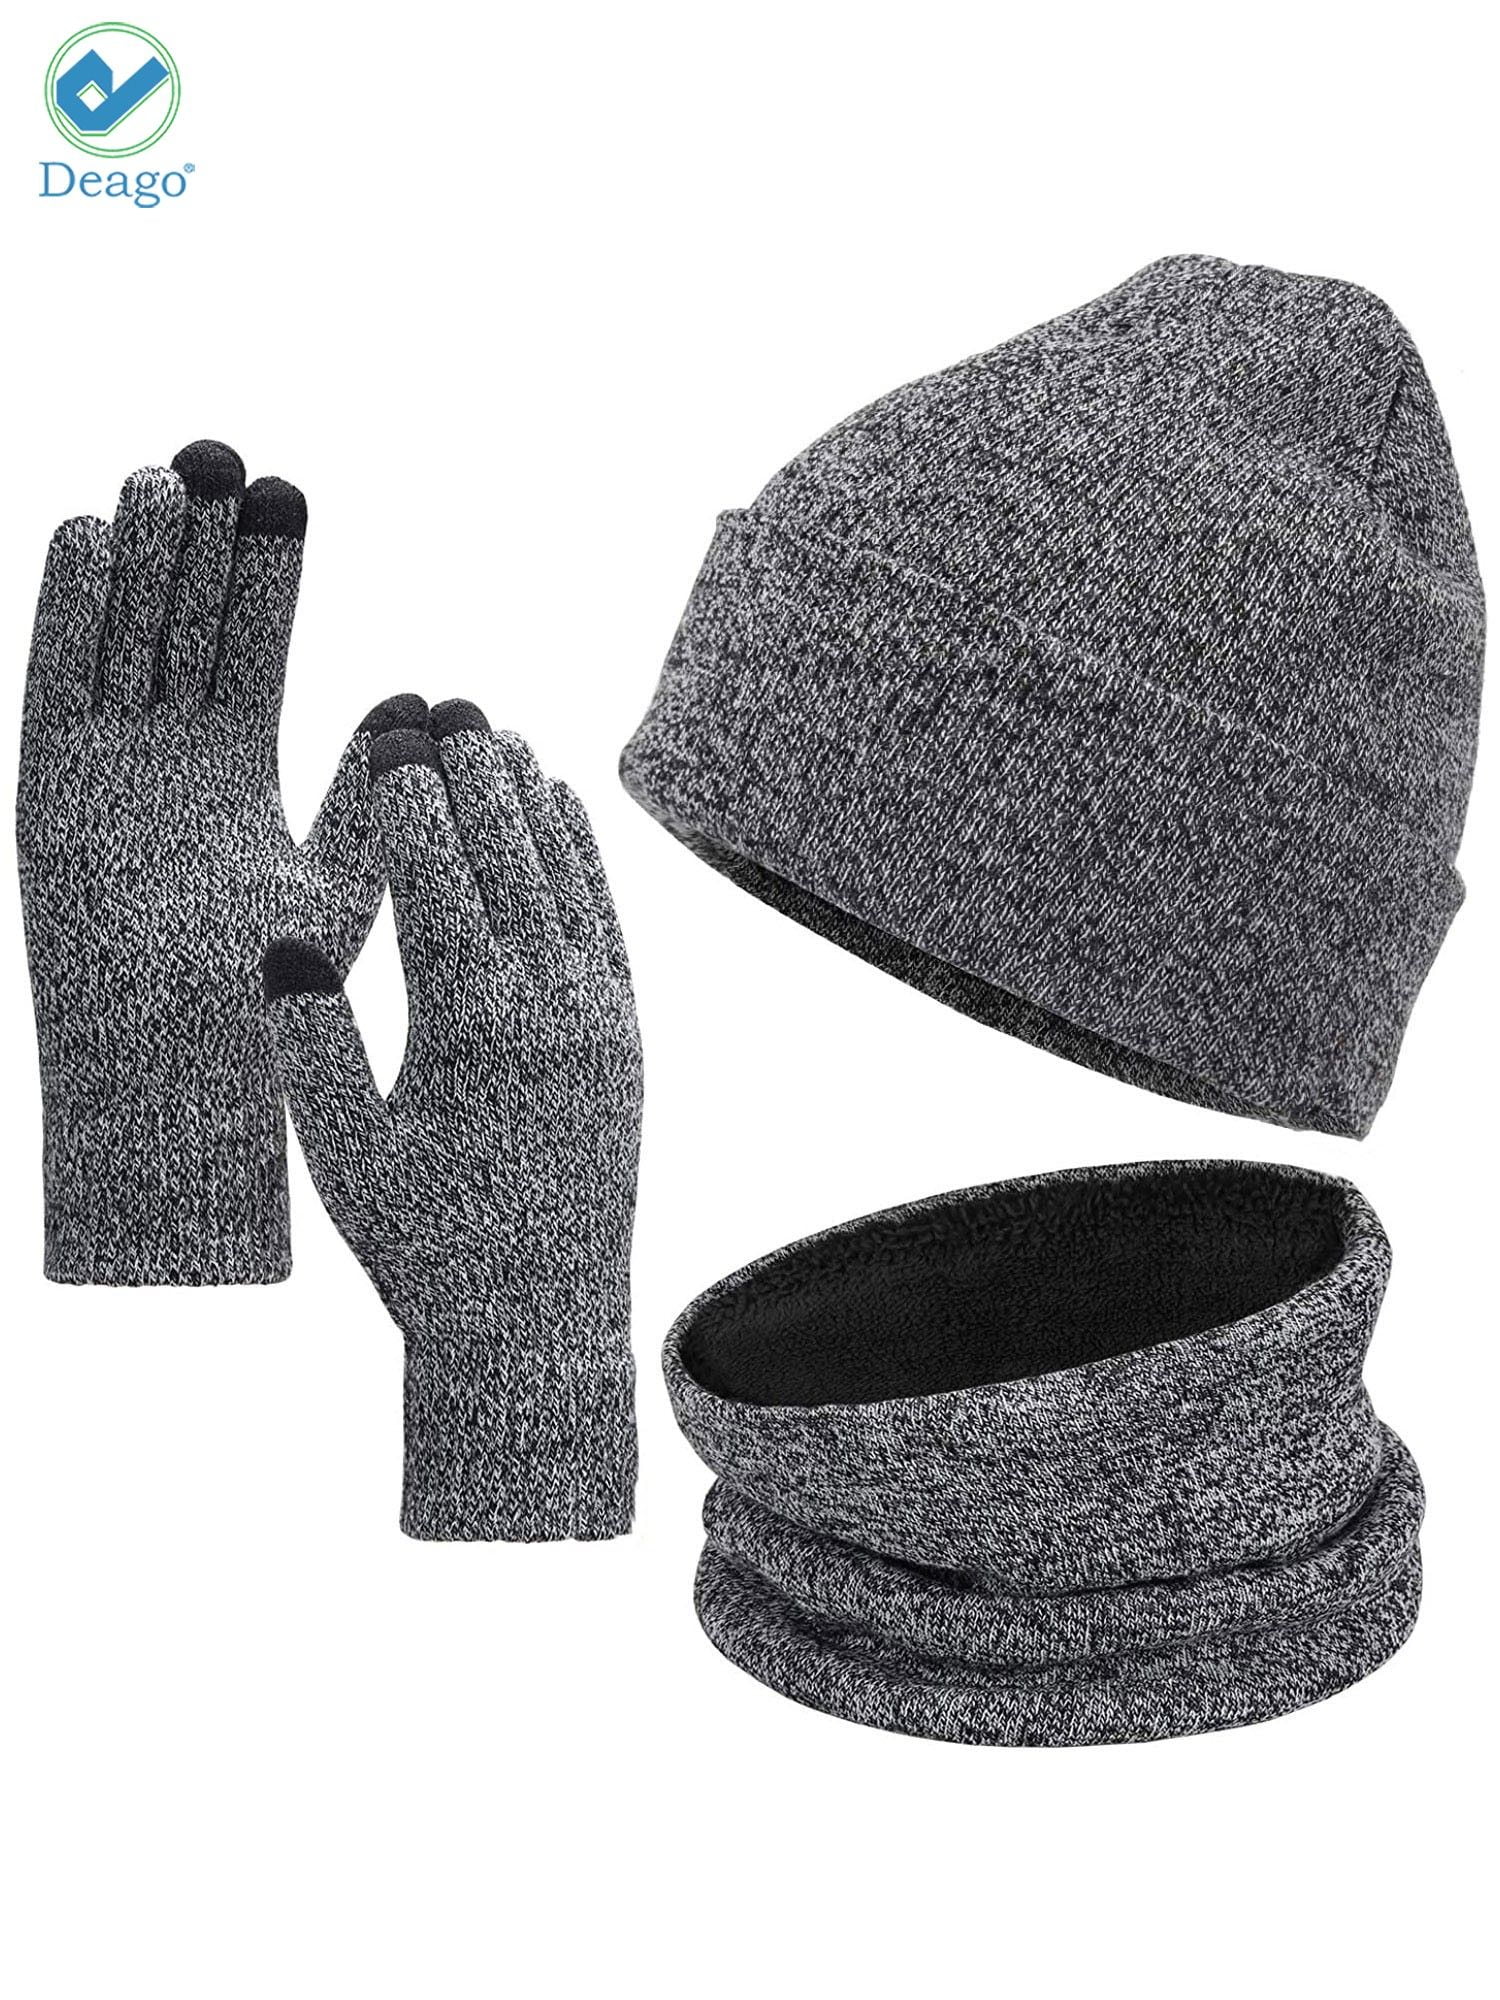 Winter Beanie Hat Scarf Touchscreen Gloves Set for Men and Women, Beanie  Gloves Neck Warmer Set with Warm Knit Fleece Lined